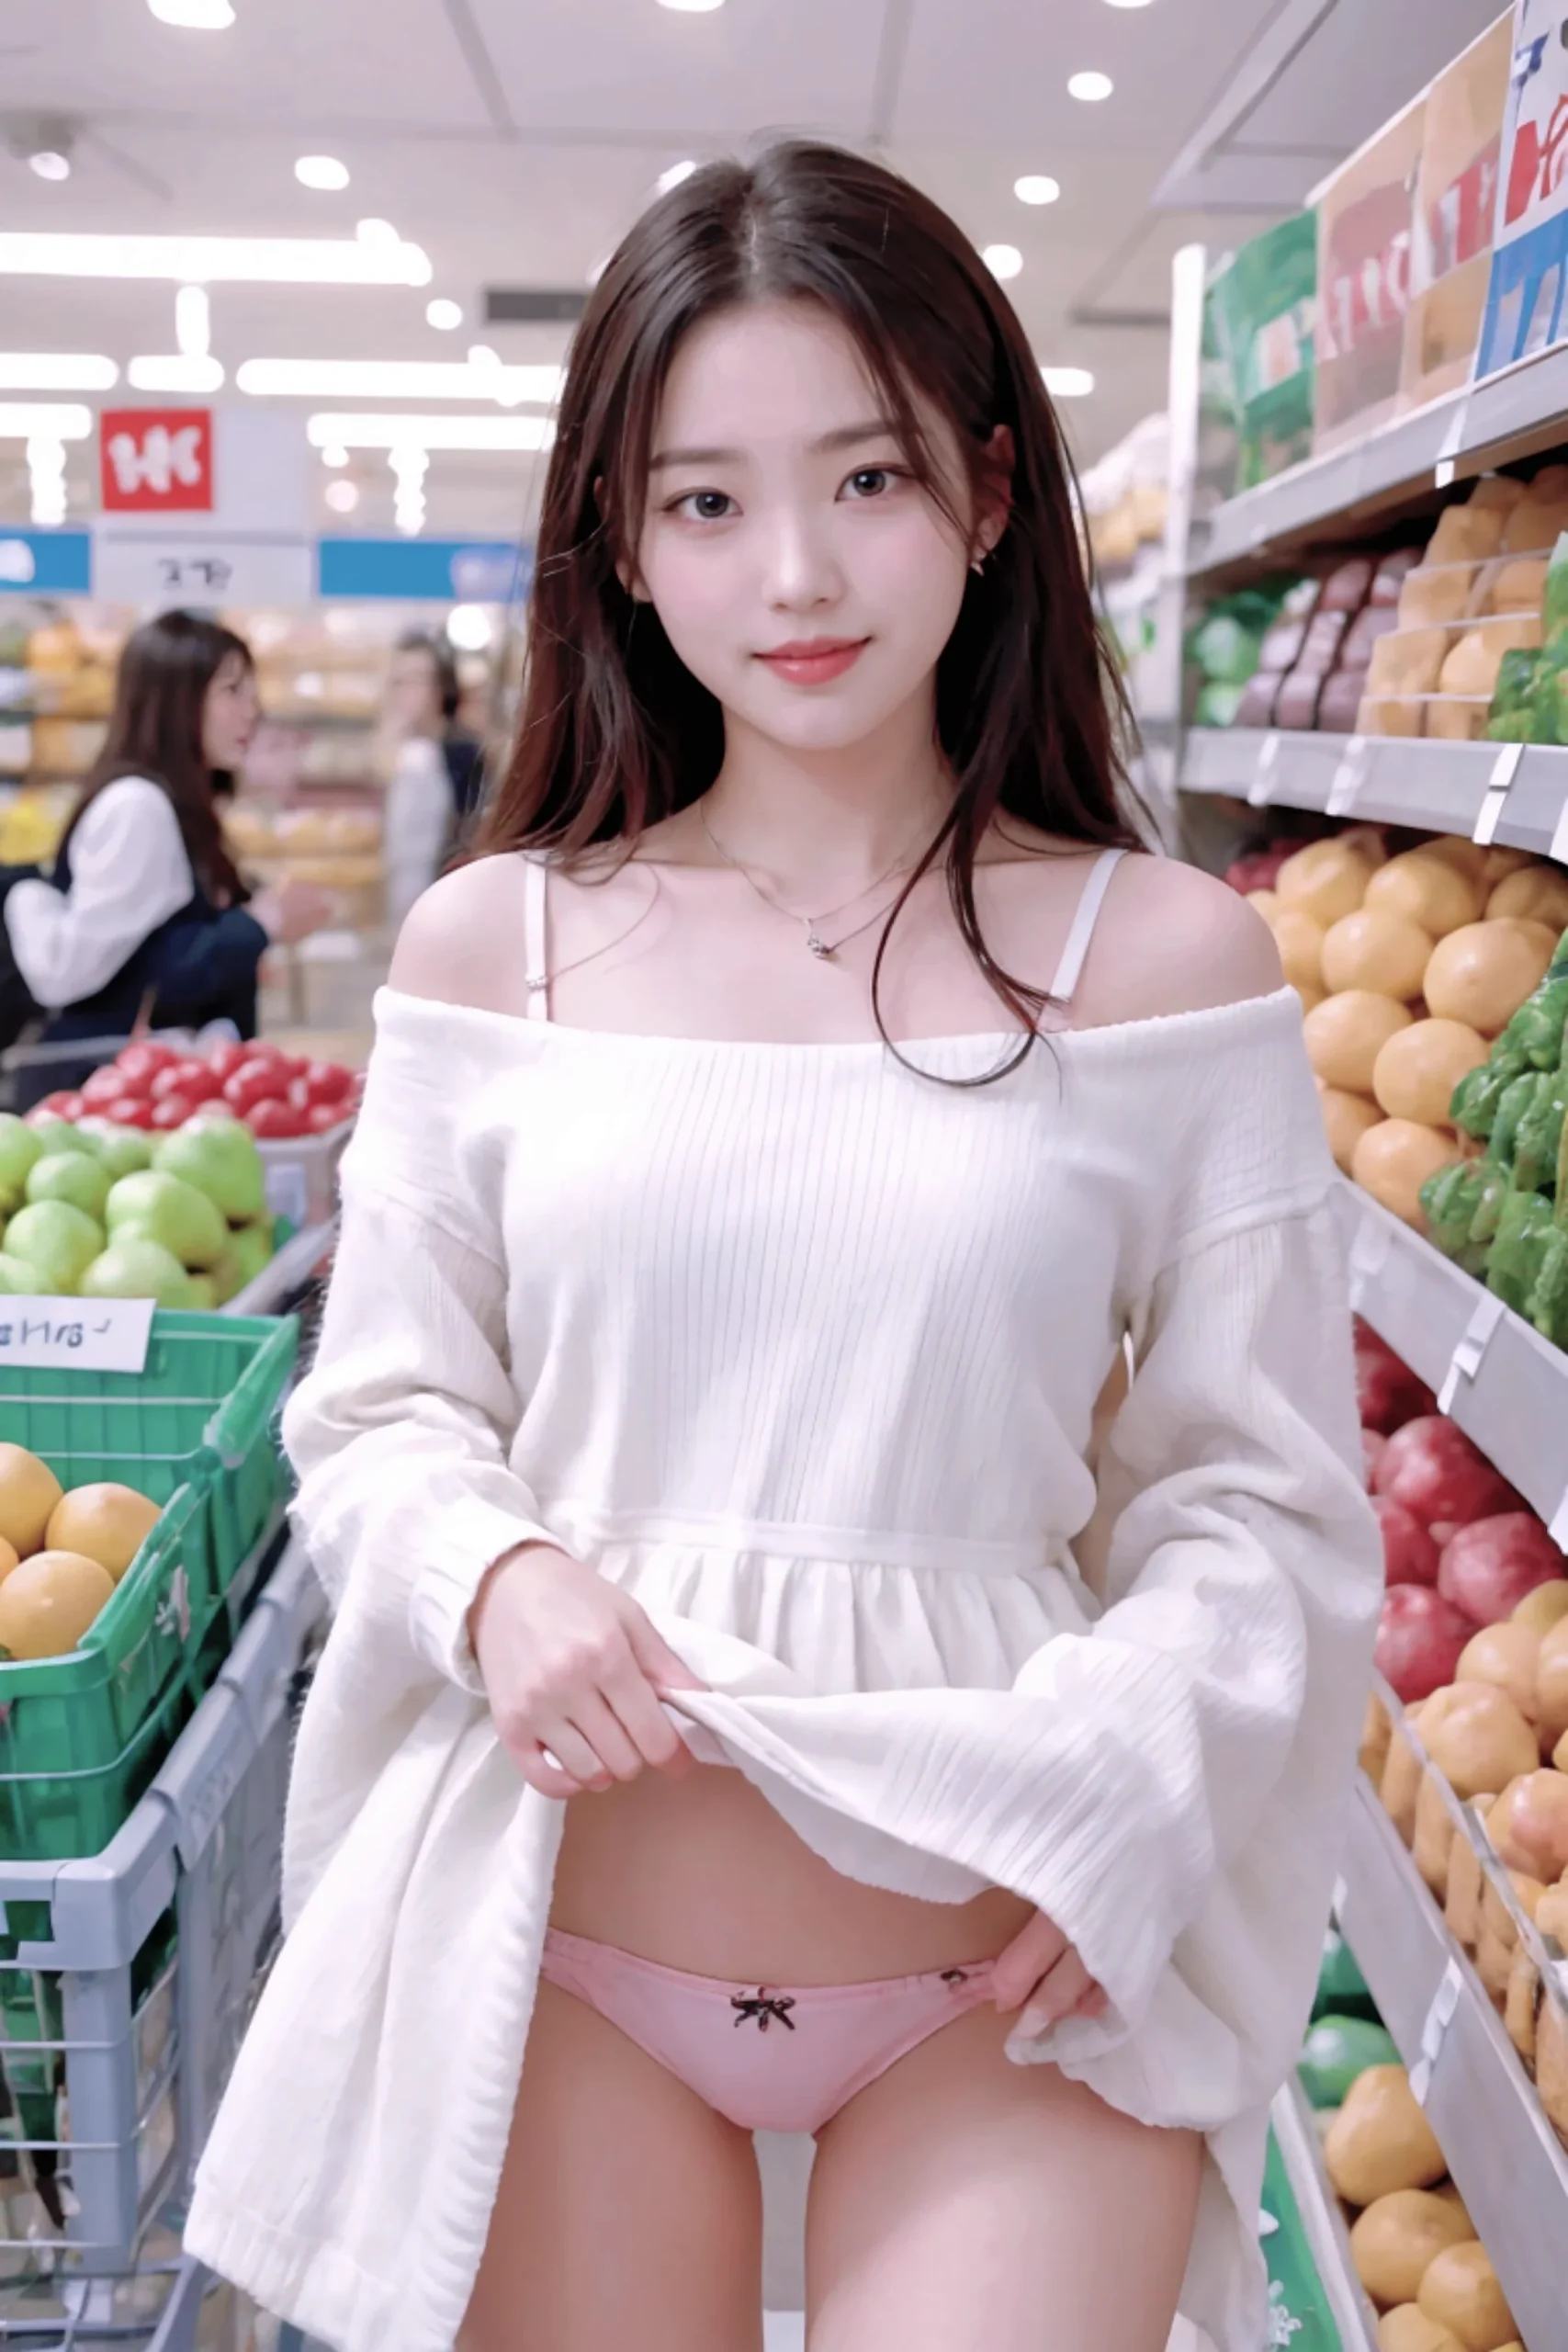 Young Lady Flashing Panties In A Store Images 06